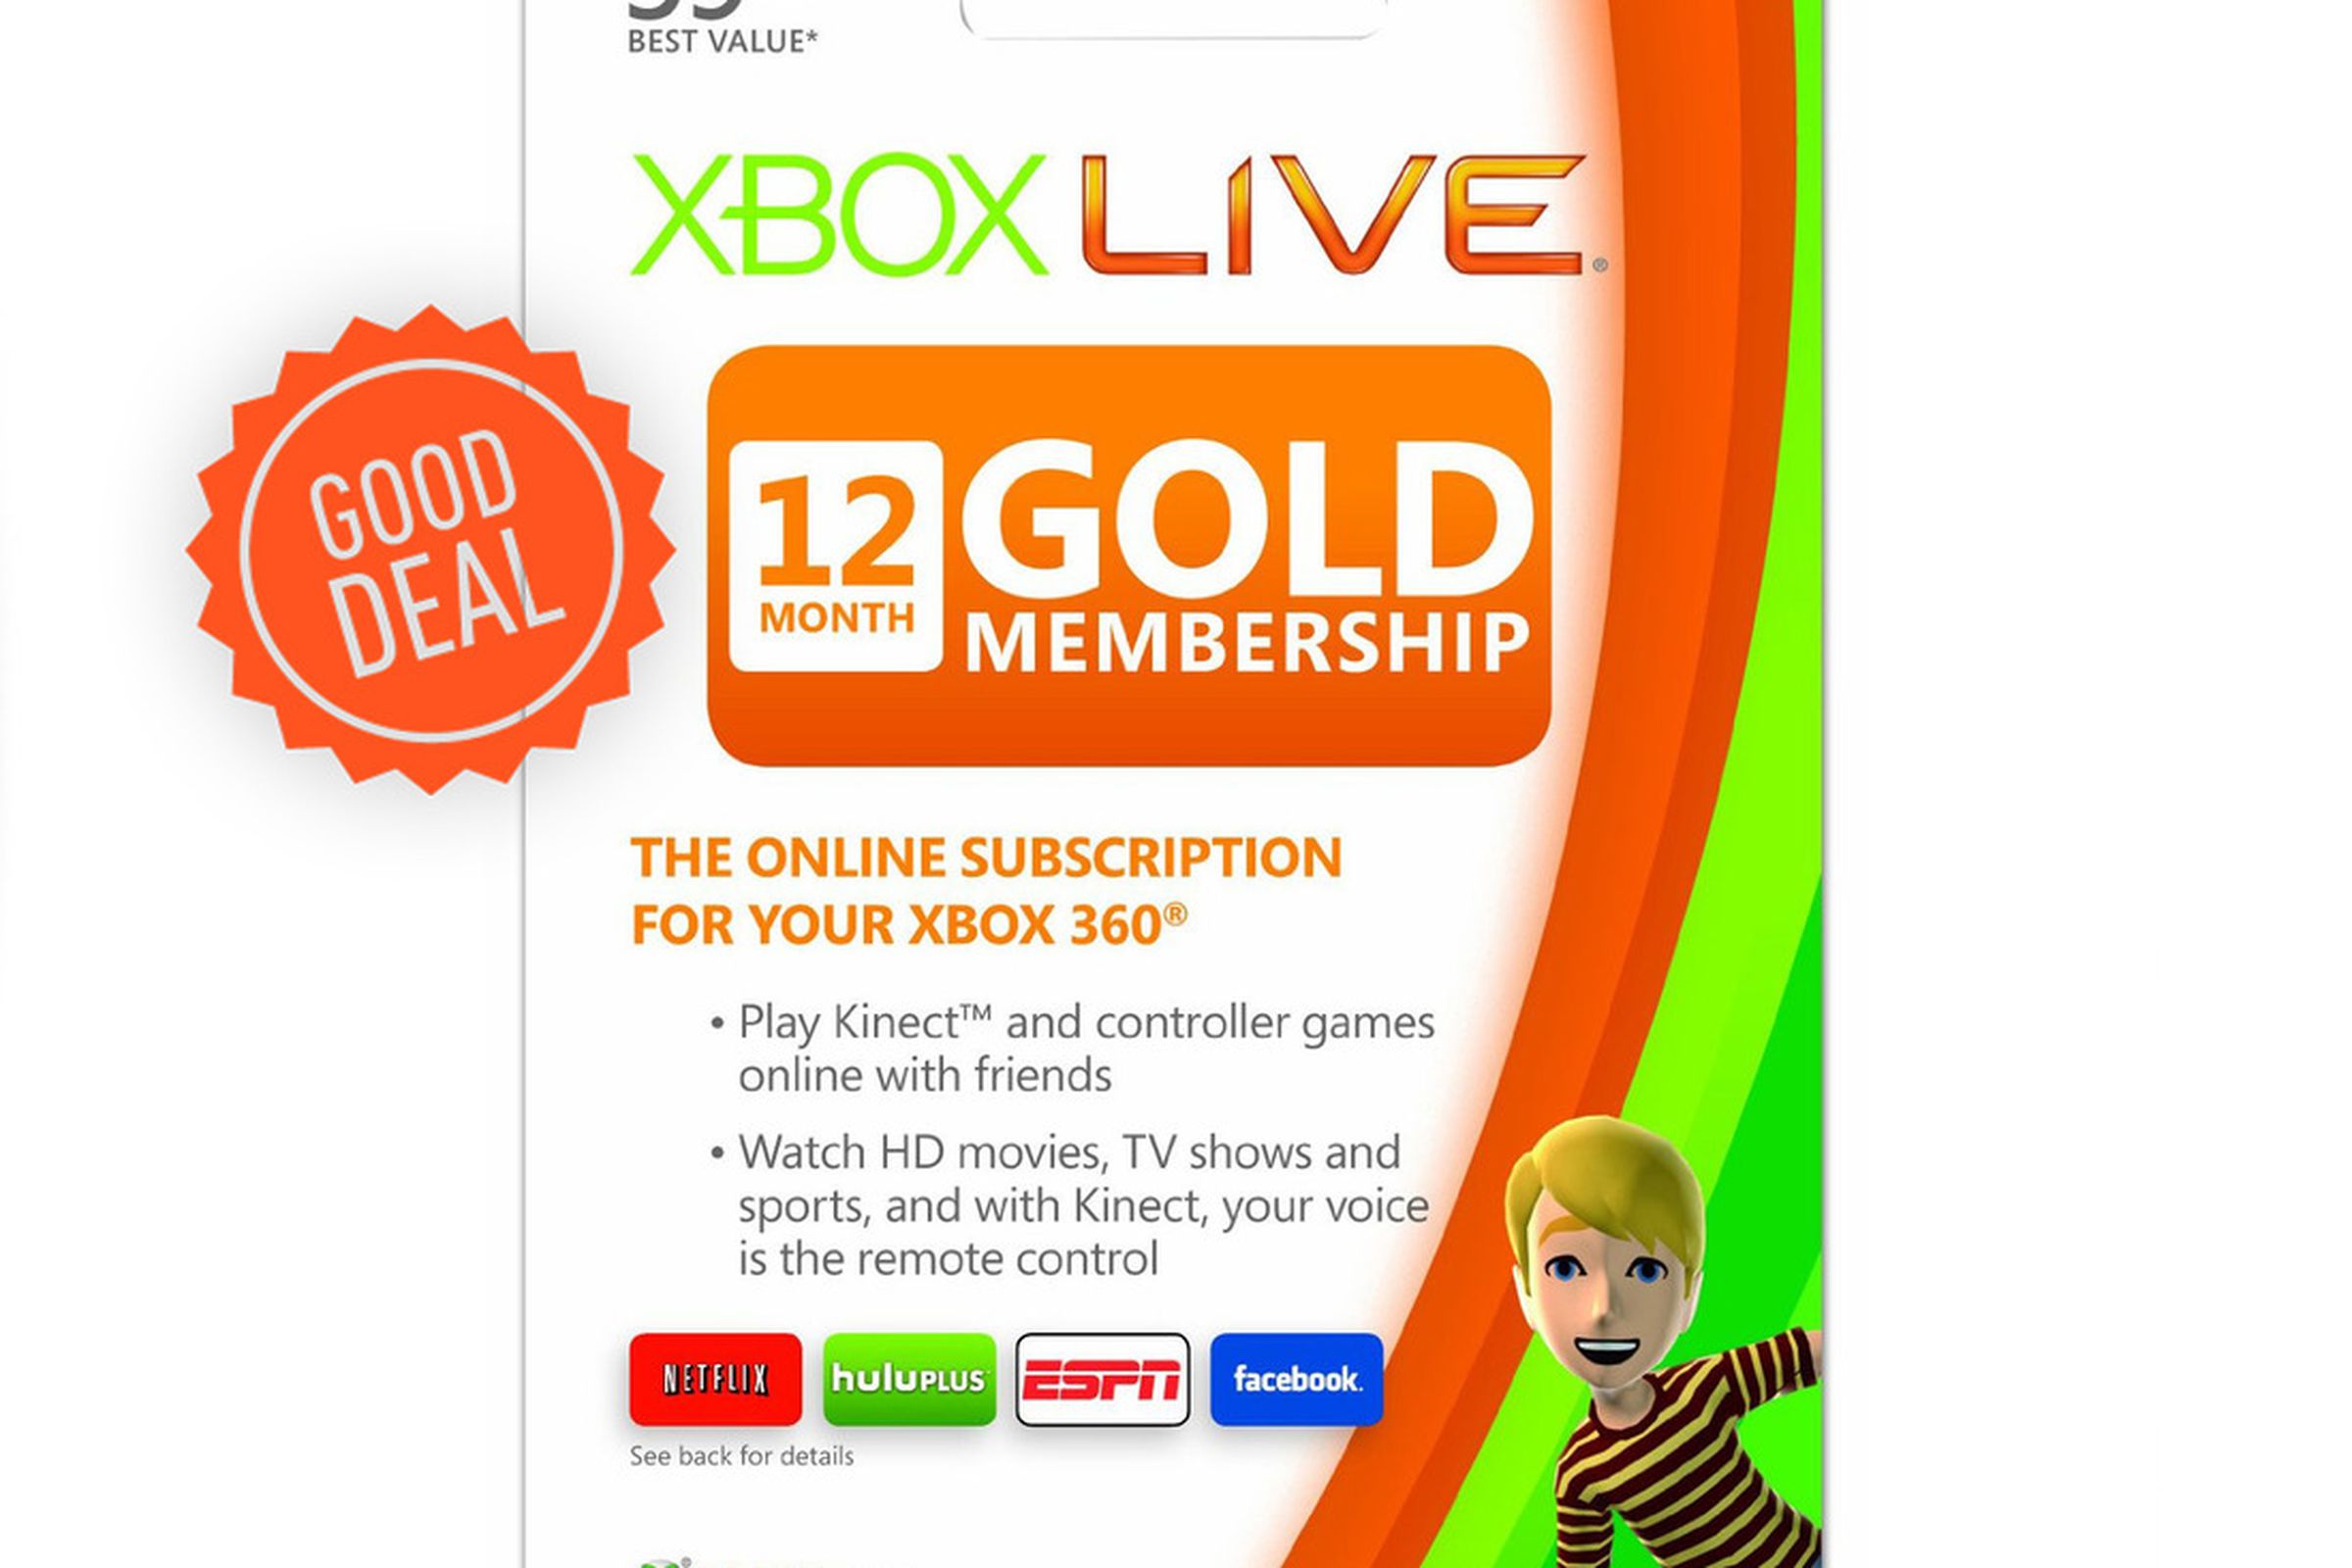 xbox live gold good deal